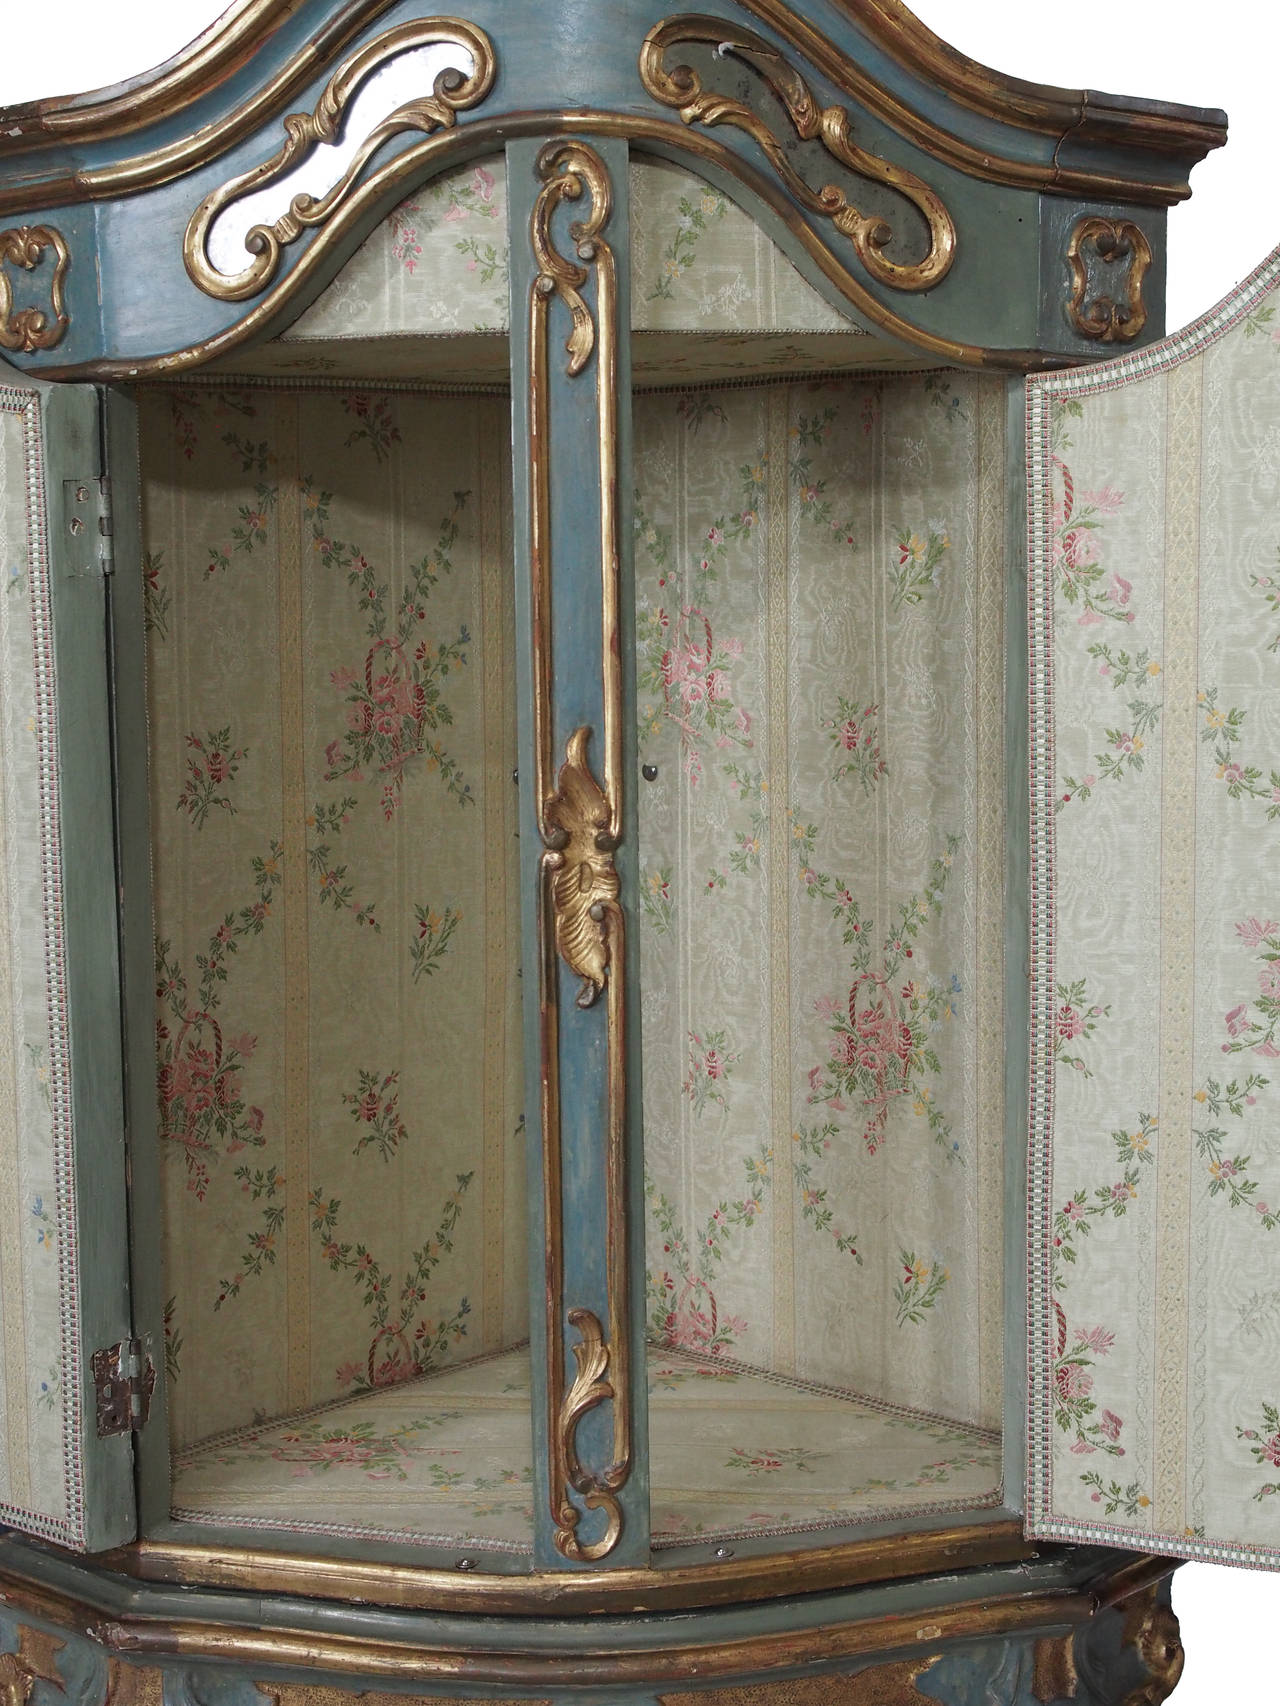 Exquisitely carved and lacquered corner cabinet on detailed legs. Mirrored doors open into charming upholstered interior. Lovely jewel box addition to a fanciful room